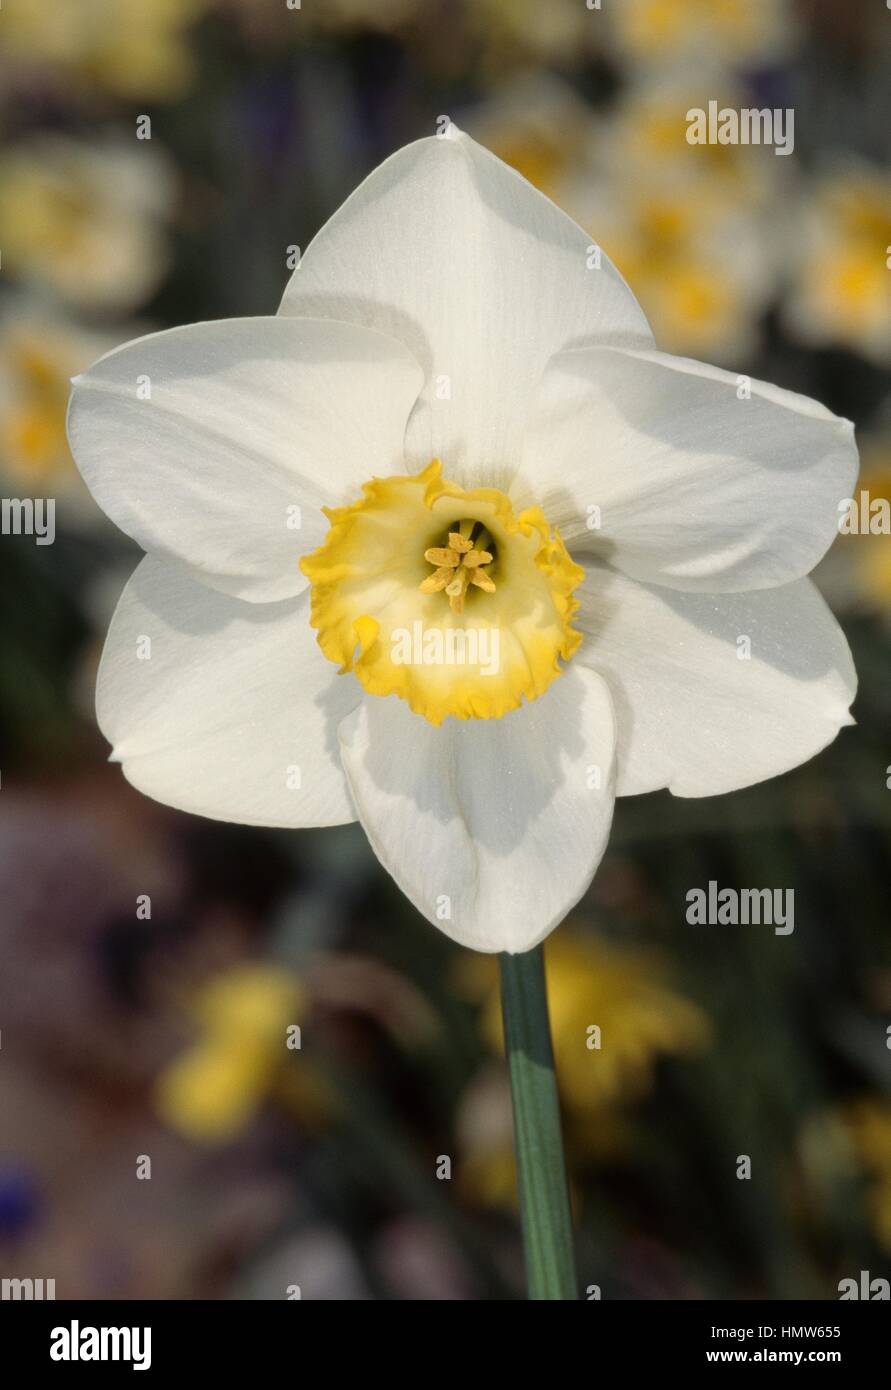 Narcissus or daffodil (Narcissus Eminent), Amaryllidaceae. Stock Photo